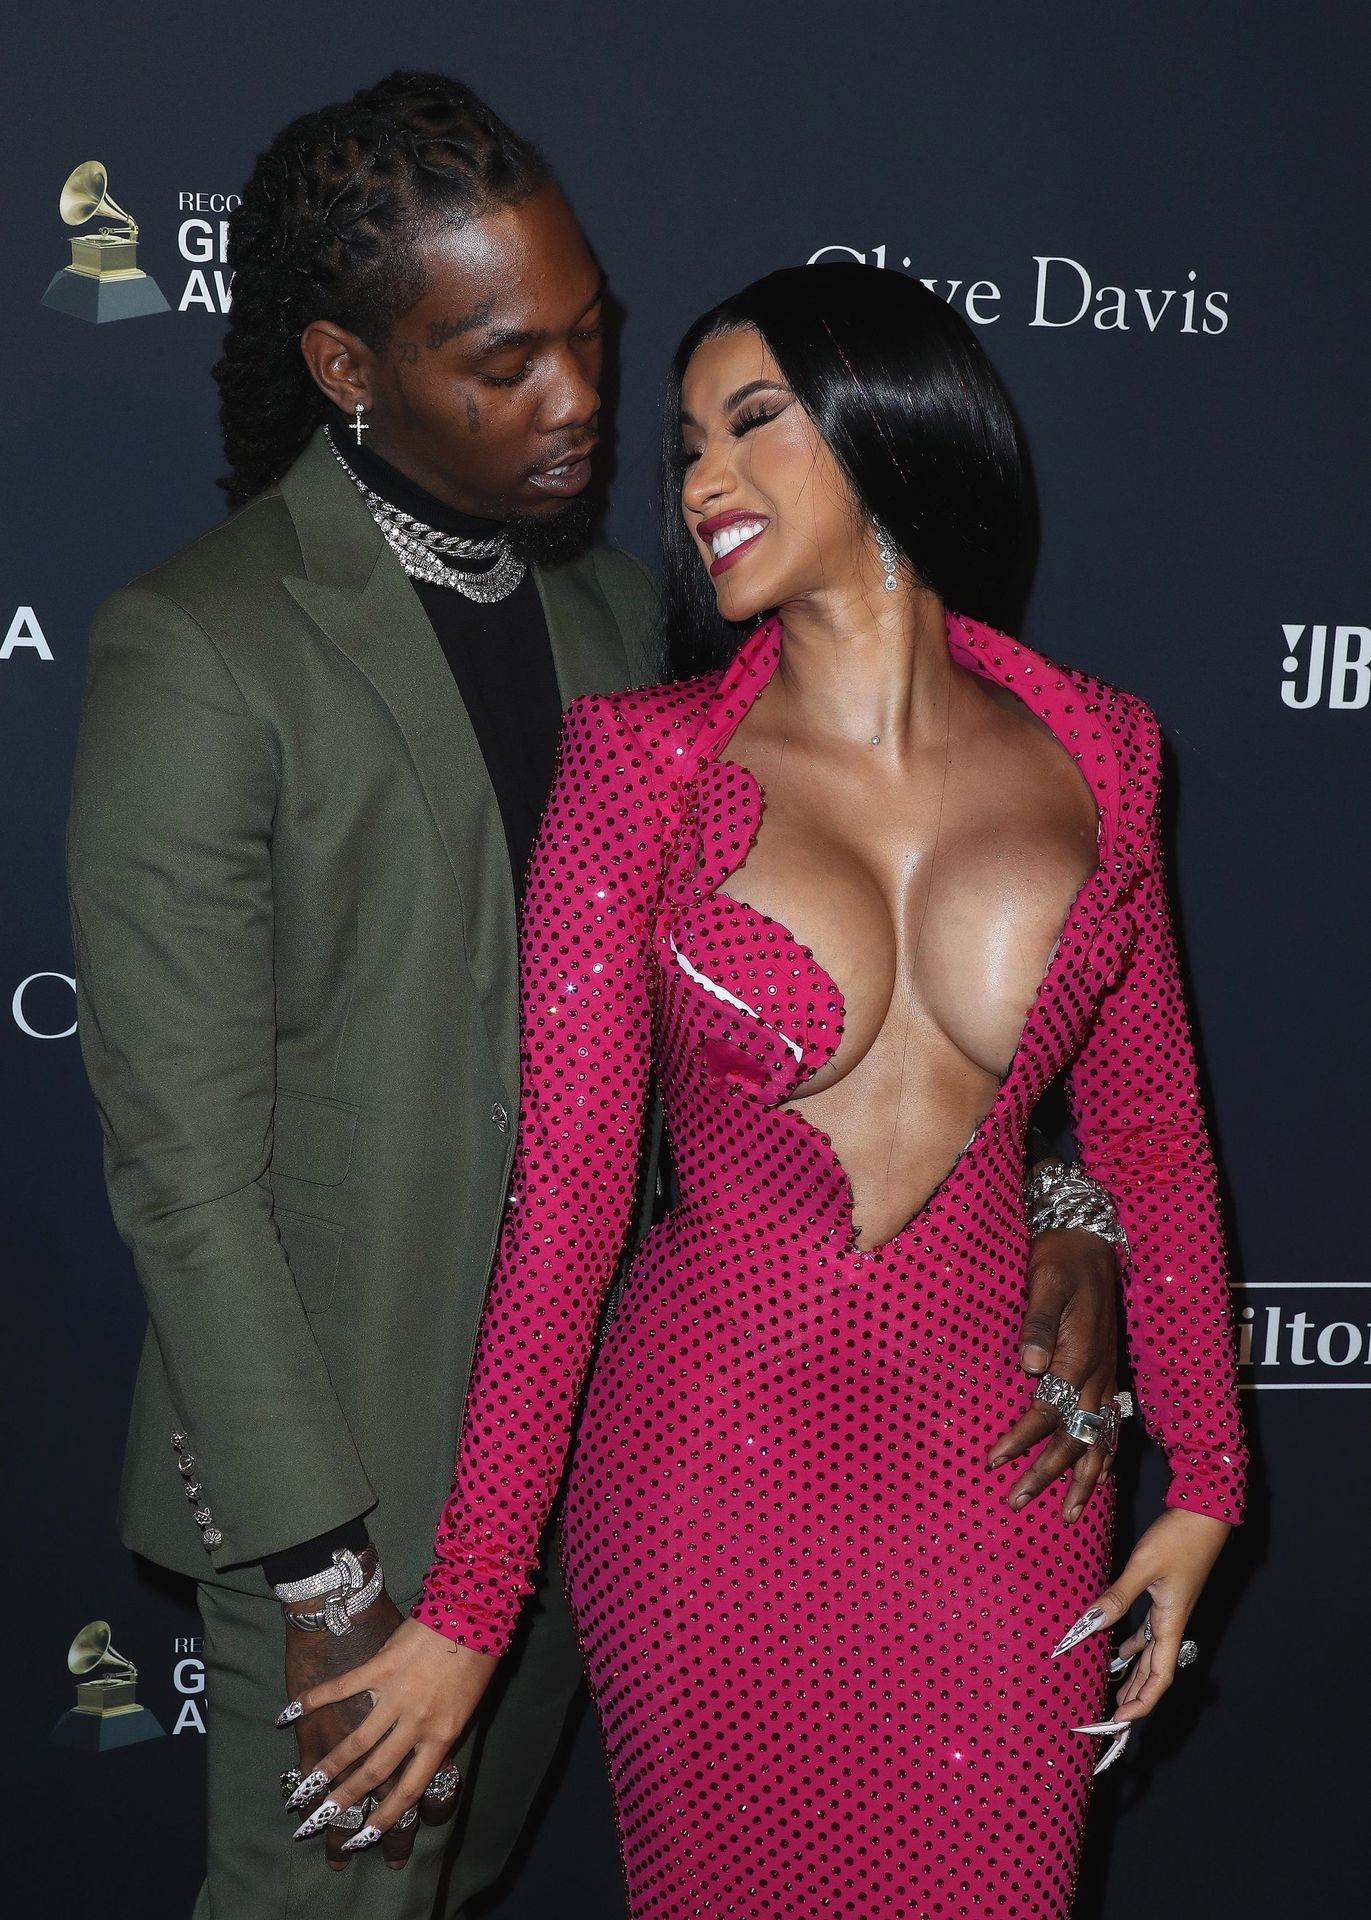 Offset Covers Cardi B’s Boobs To Avoid Wardrobe Malfunction At Clive Davis Pre Grammy Party 0041